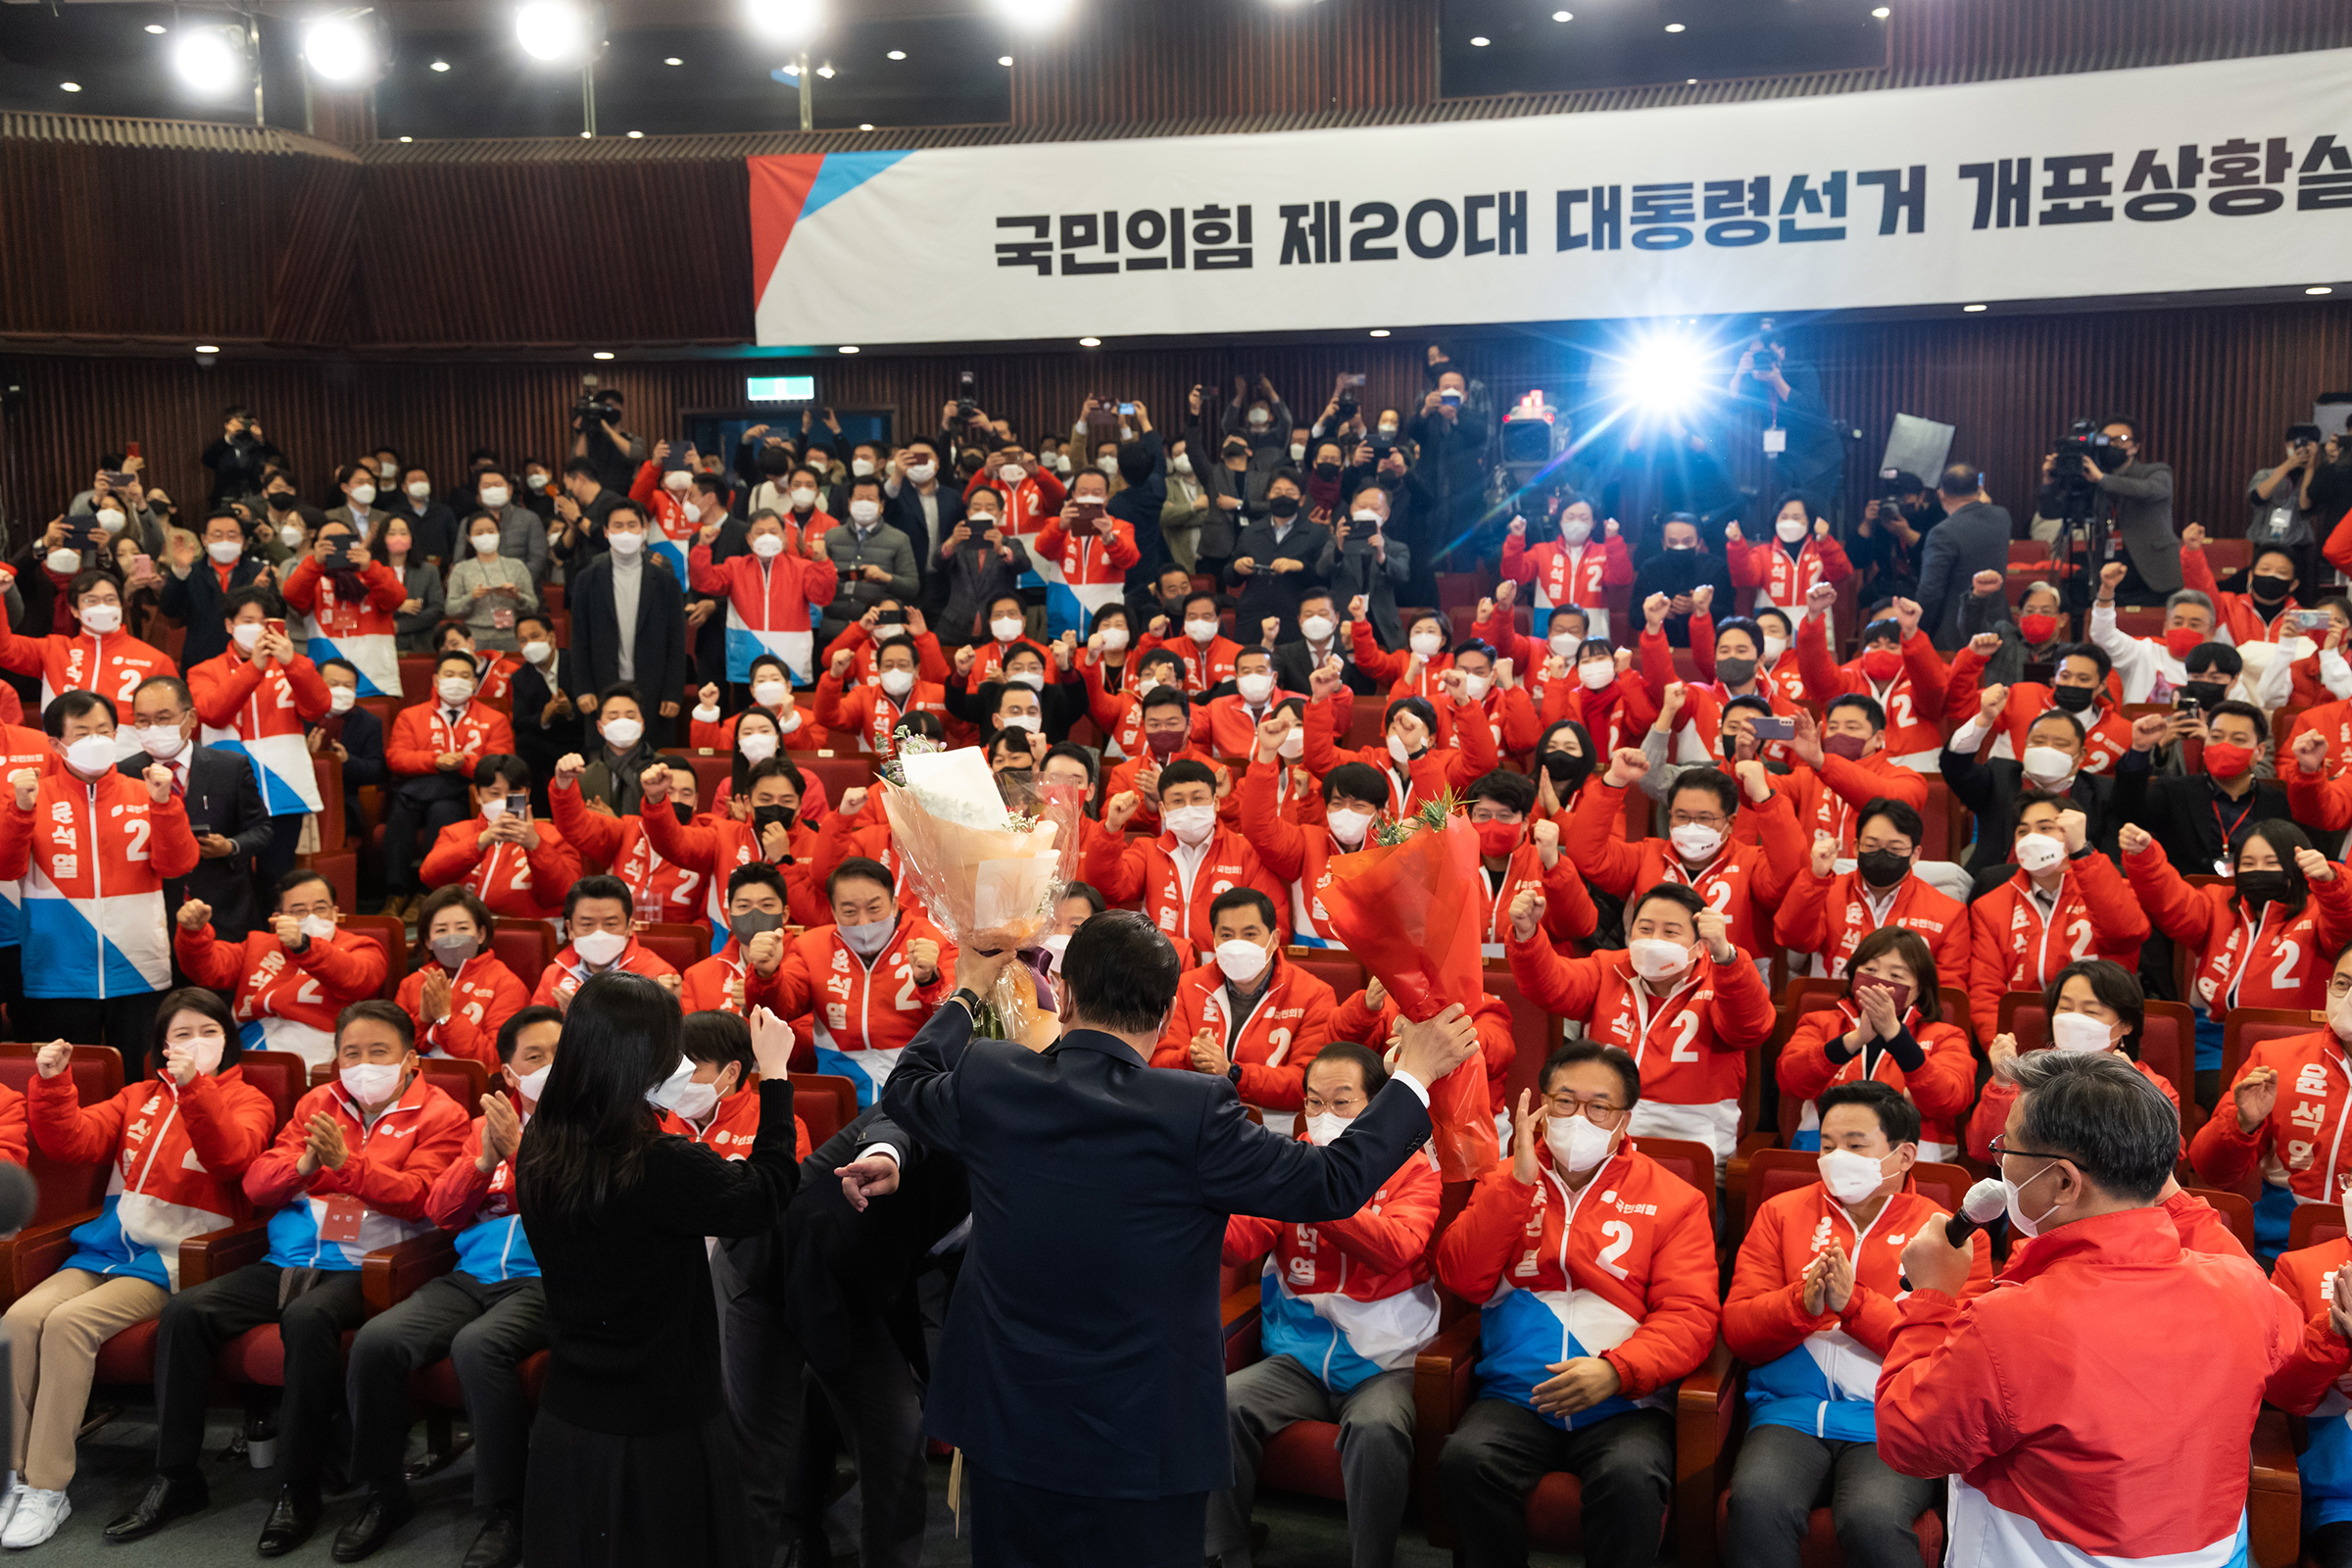 Yoon, South Korea's president-elect and holding a bouquet, speaks at his campaign office in the National Assembly. The former top prosecutor won the election as South Korea's president, returning the conservative opposition to power after five years (SeongJoon Cho—Bloomberg/Getty Images)